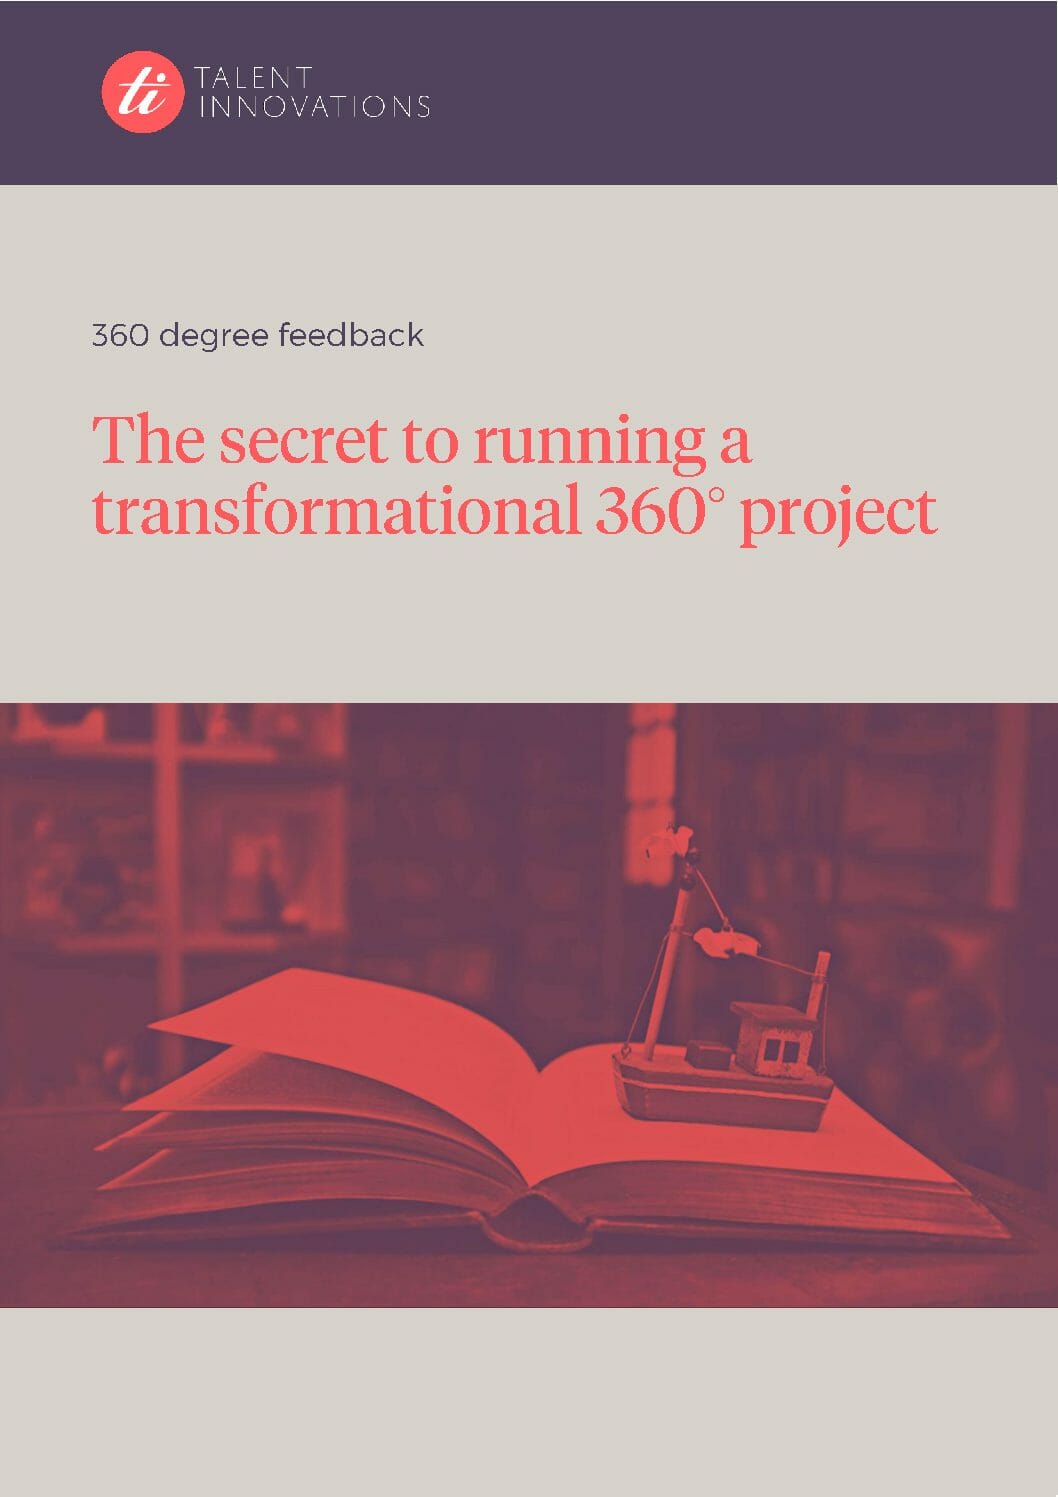 The secret to running a transformational 360 project